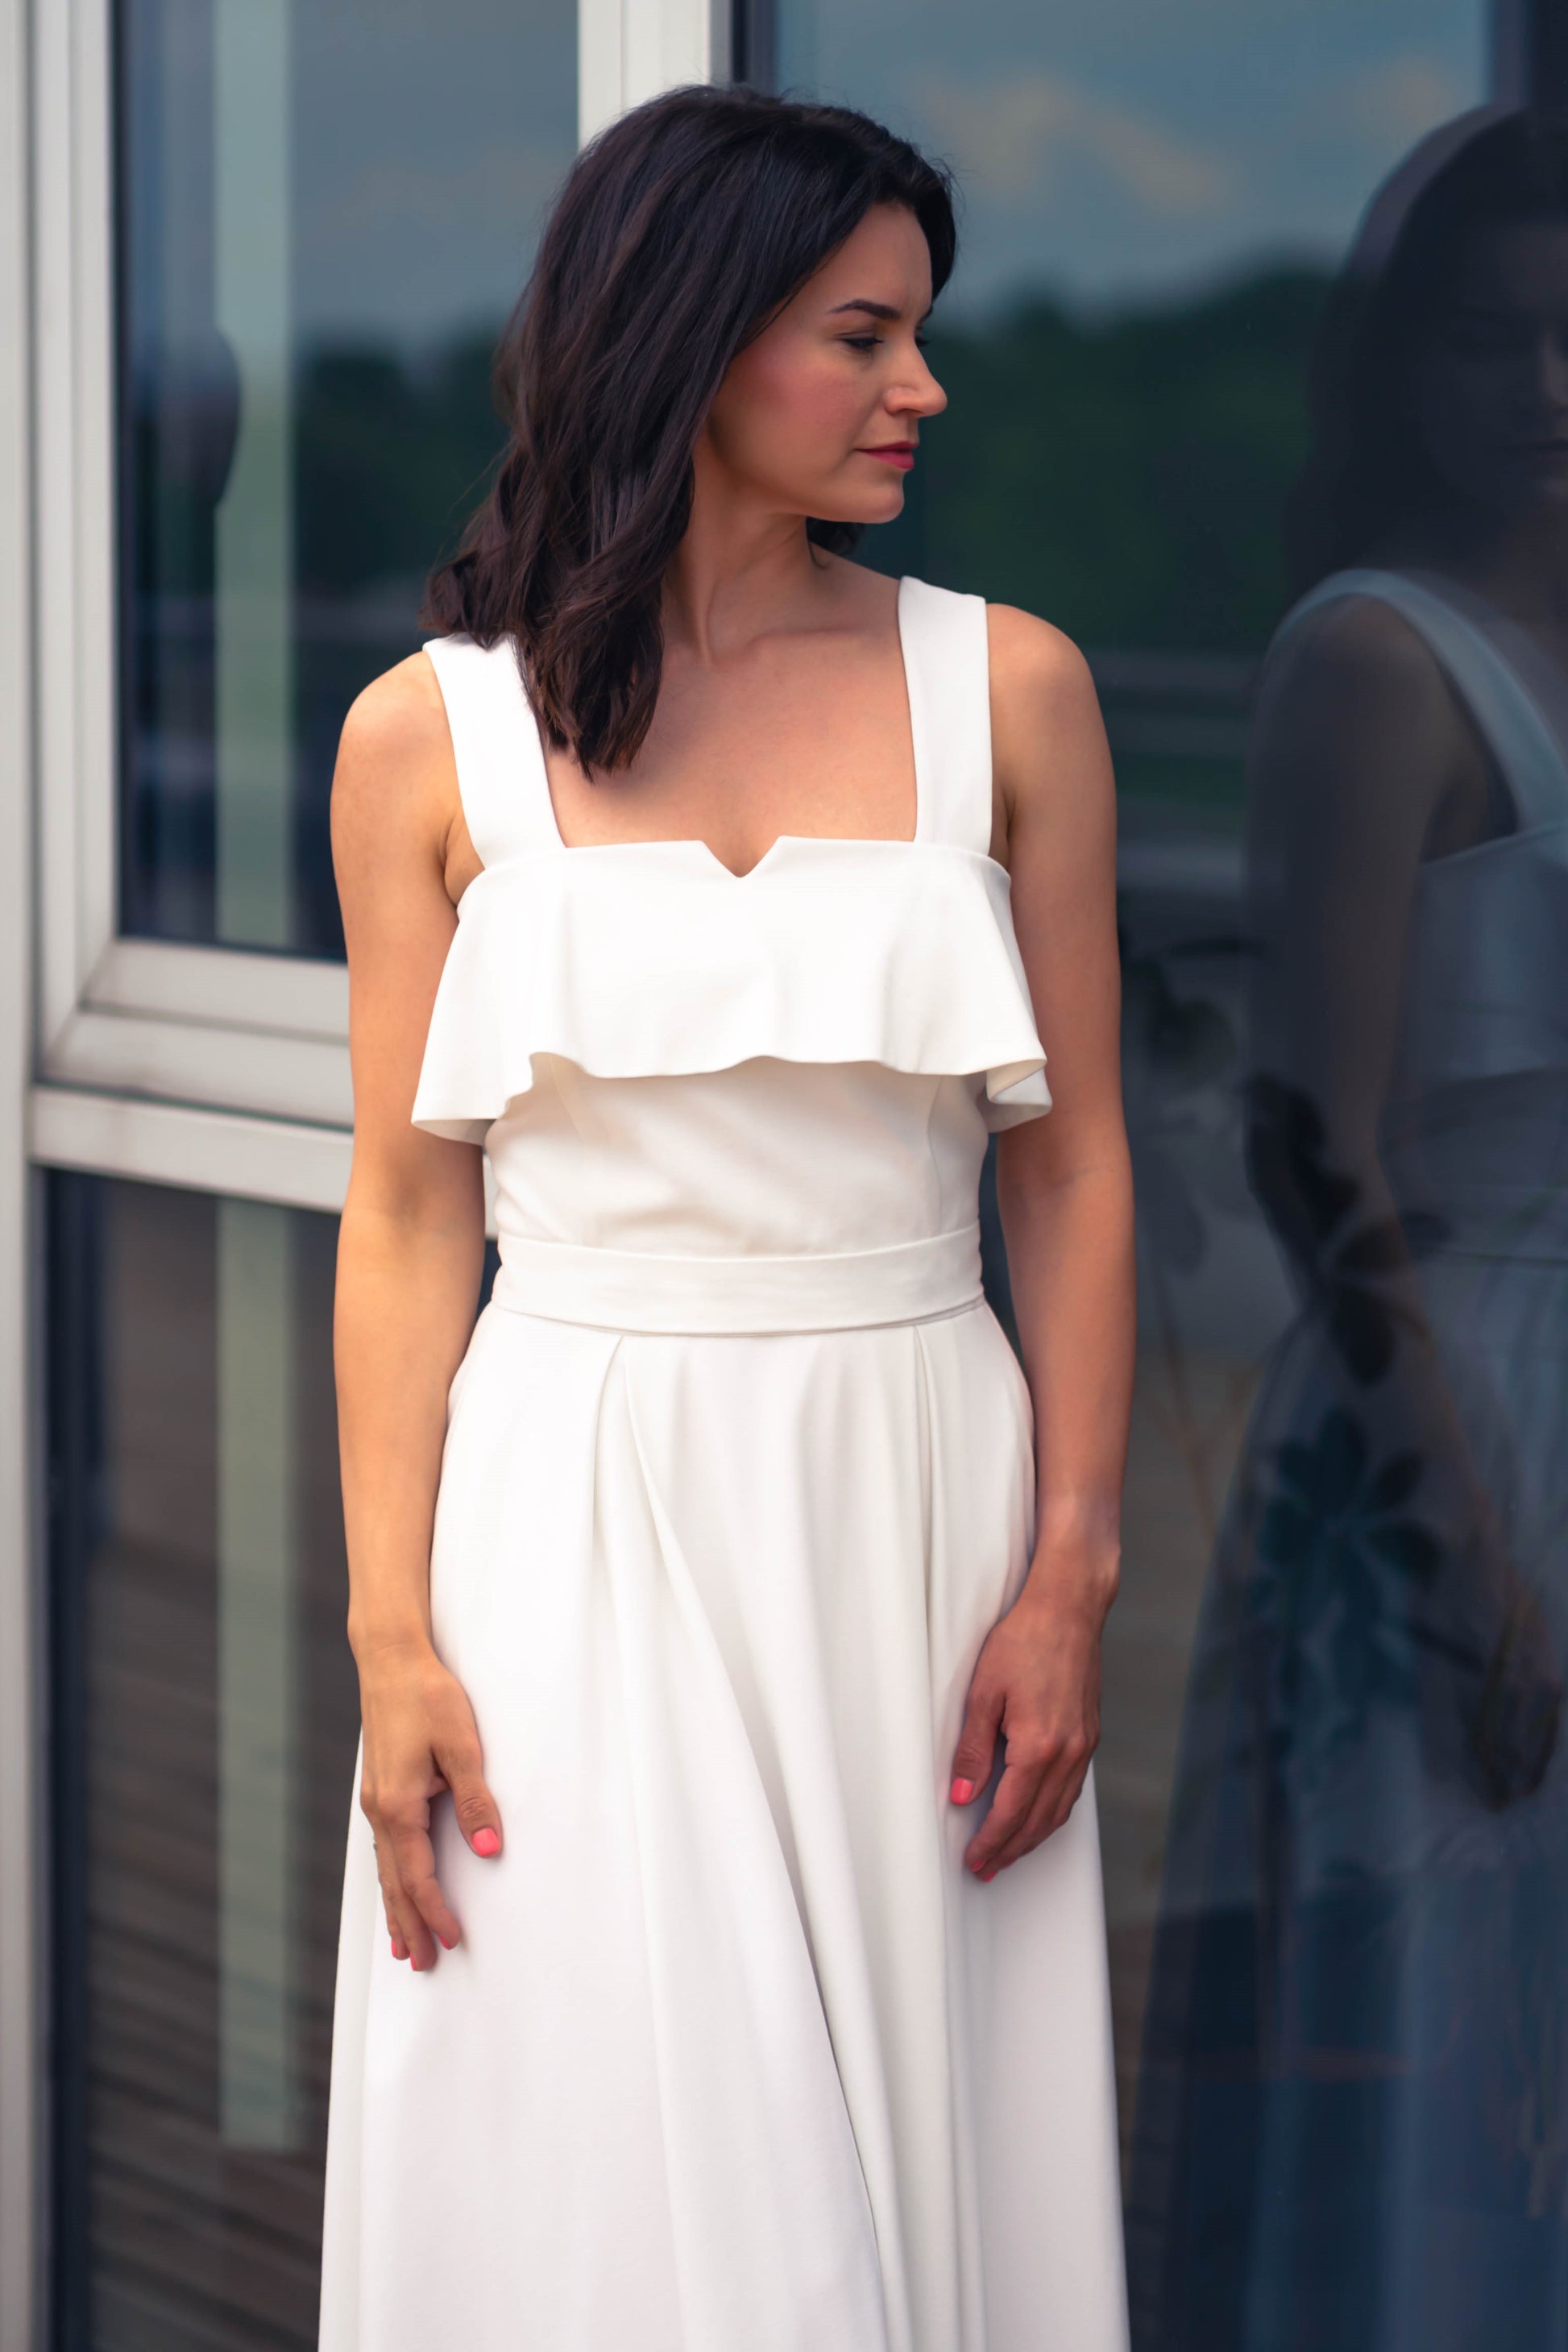 beautiful brunette in a white two piece dress - a ruffled corset top and wide flowy skirt